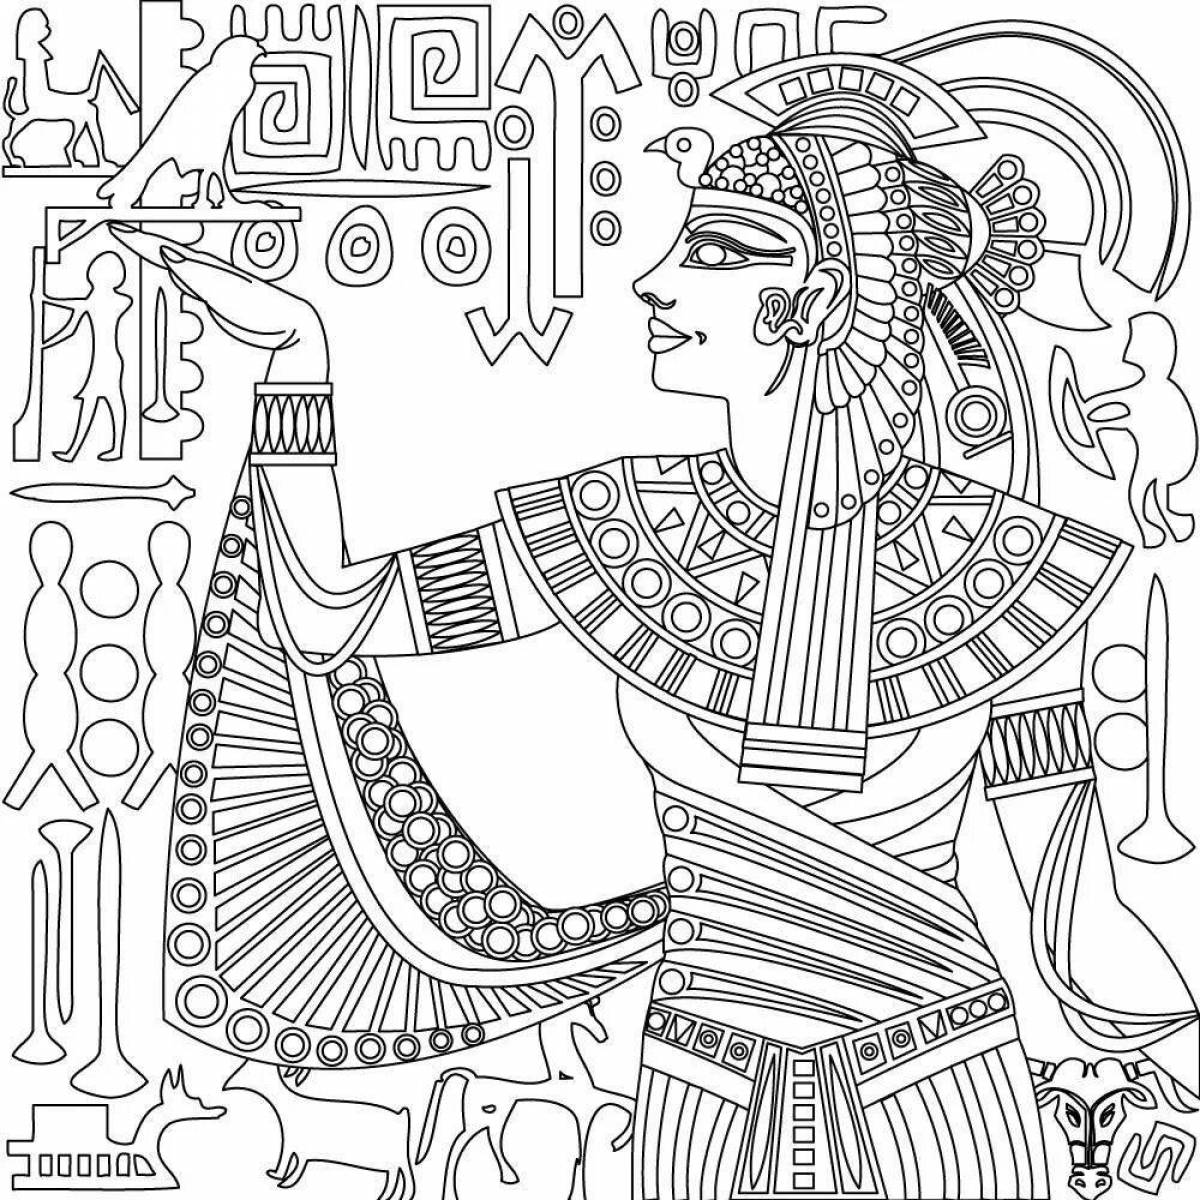 Outstanding ancient egypt coloring book for kids